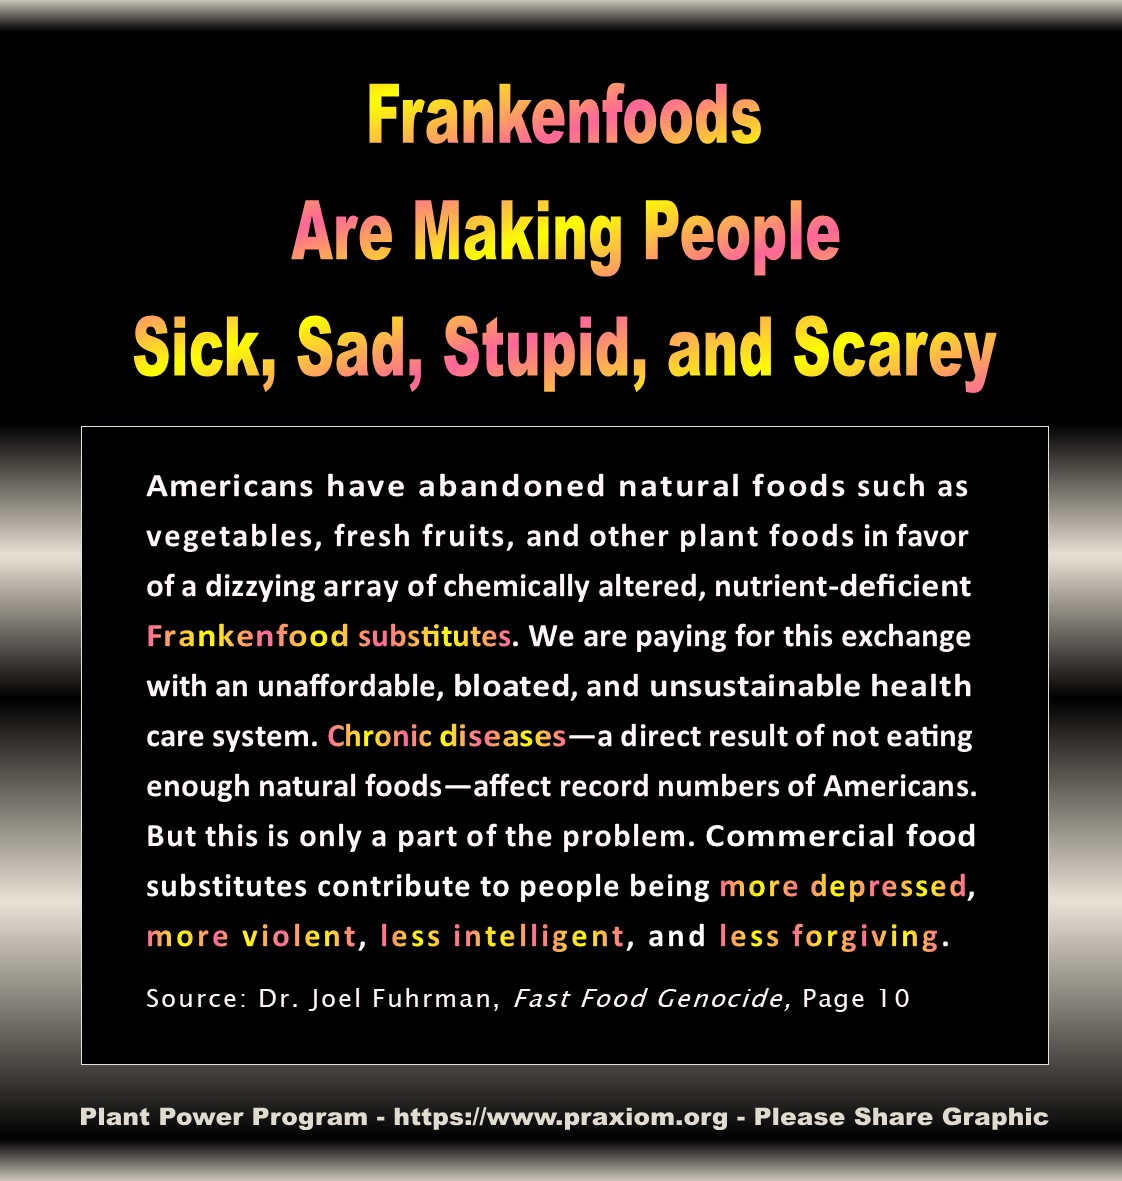 Frankenfoods are making us sick, stupid, and nasty